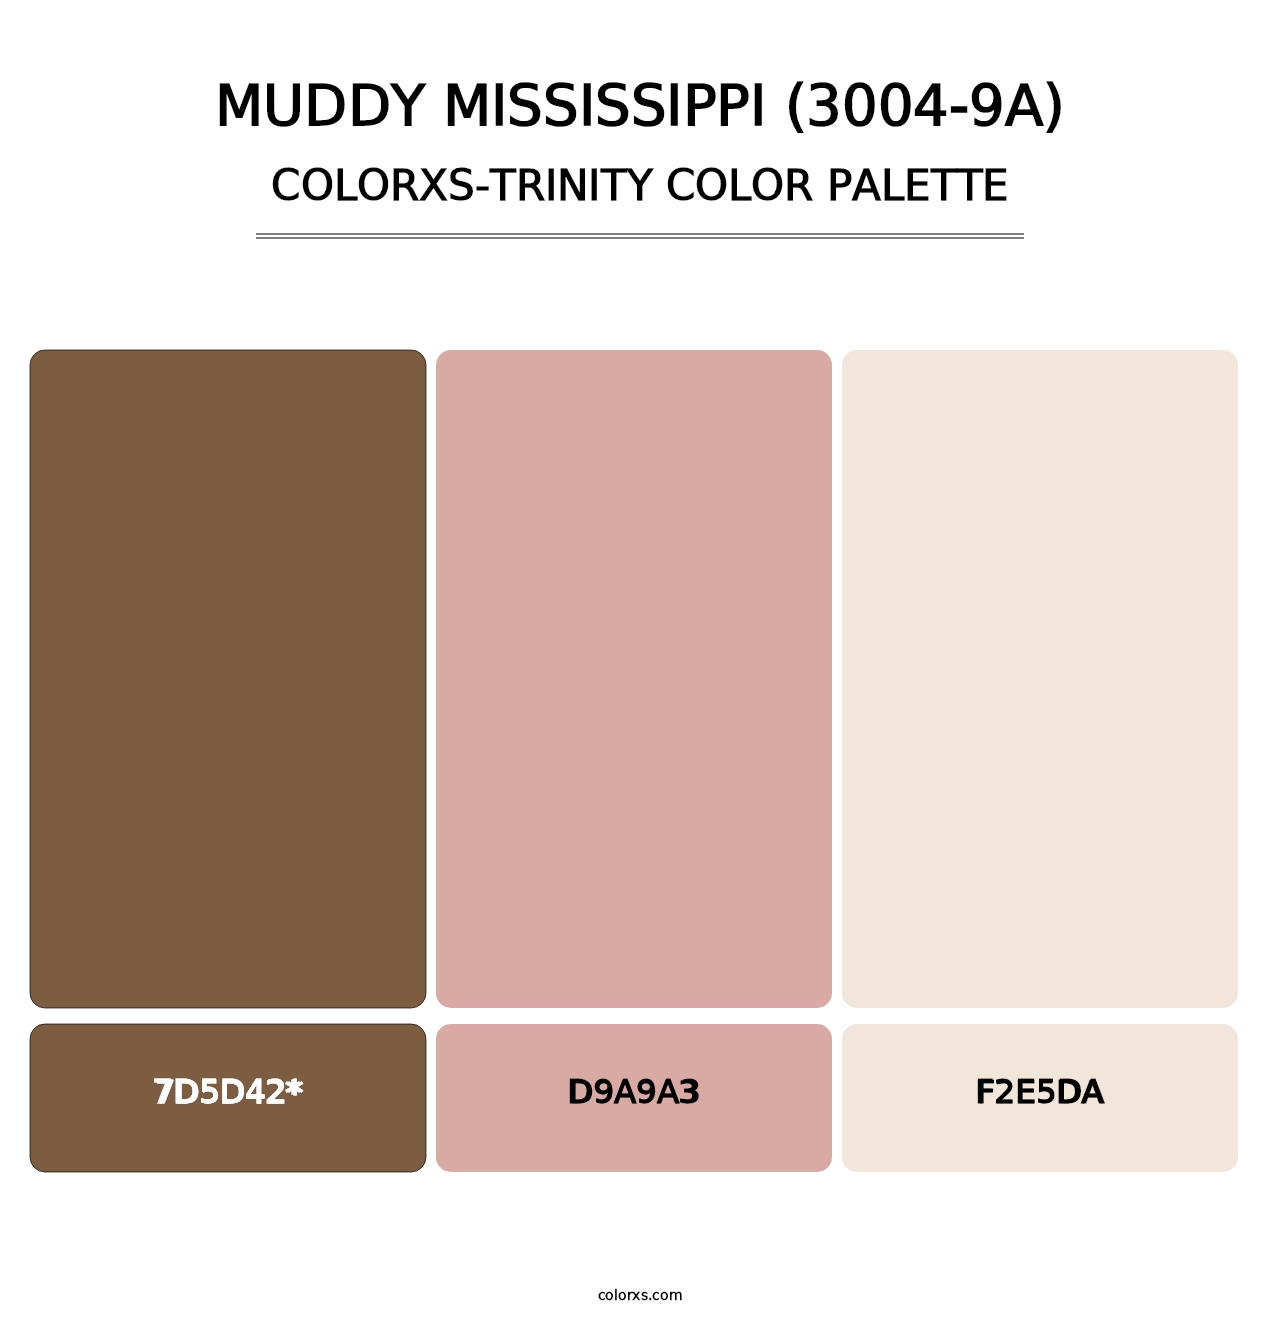 Muddy Mississippi (3004-9A) - Colorxs Trinity Palette